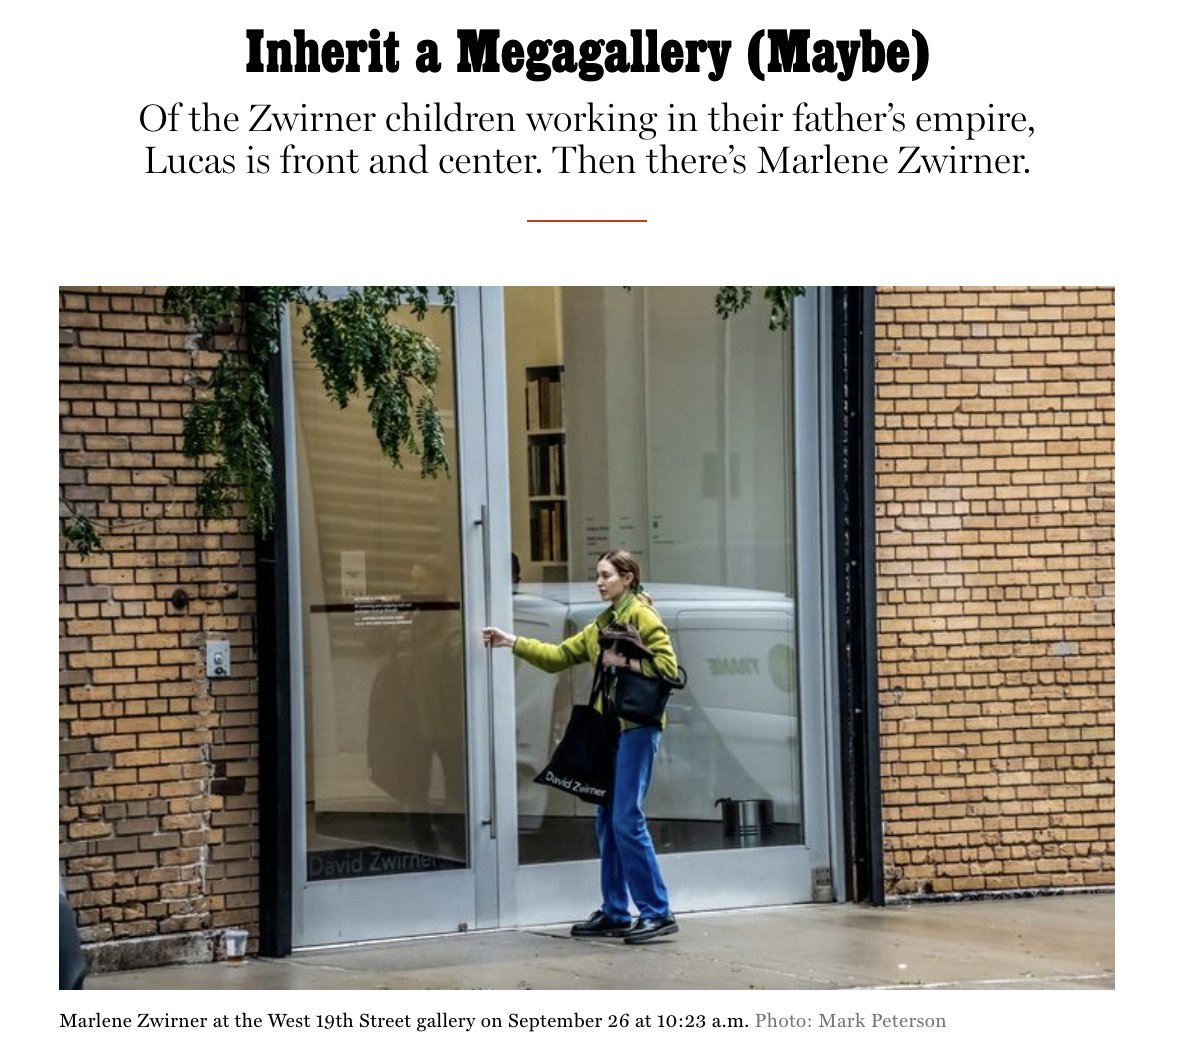 I called about 25 people to write about 250 words on the true power of a gallerist who can recruit artists, book shows, collab with fashion brands, and, perhaps most importantly, whisper into her father's ear. nymag.com/intelligencer/…